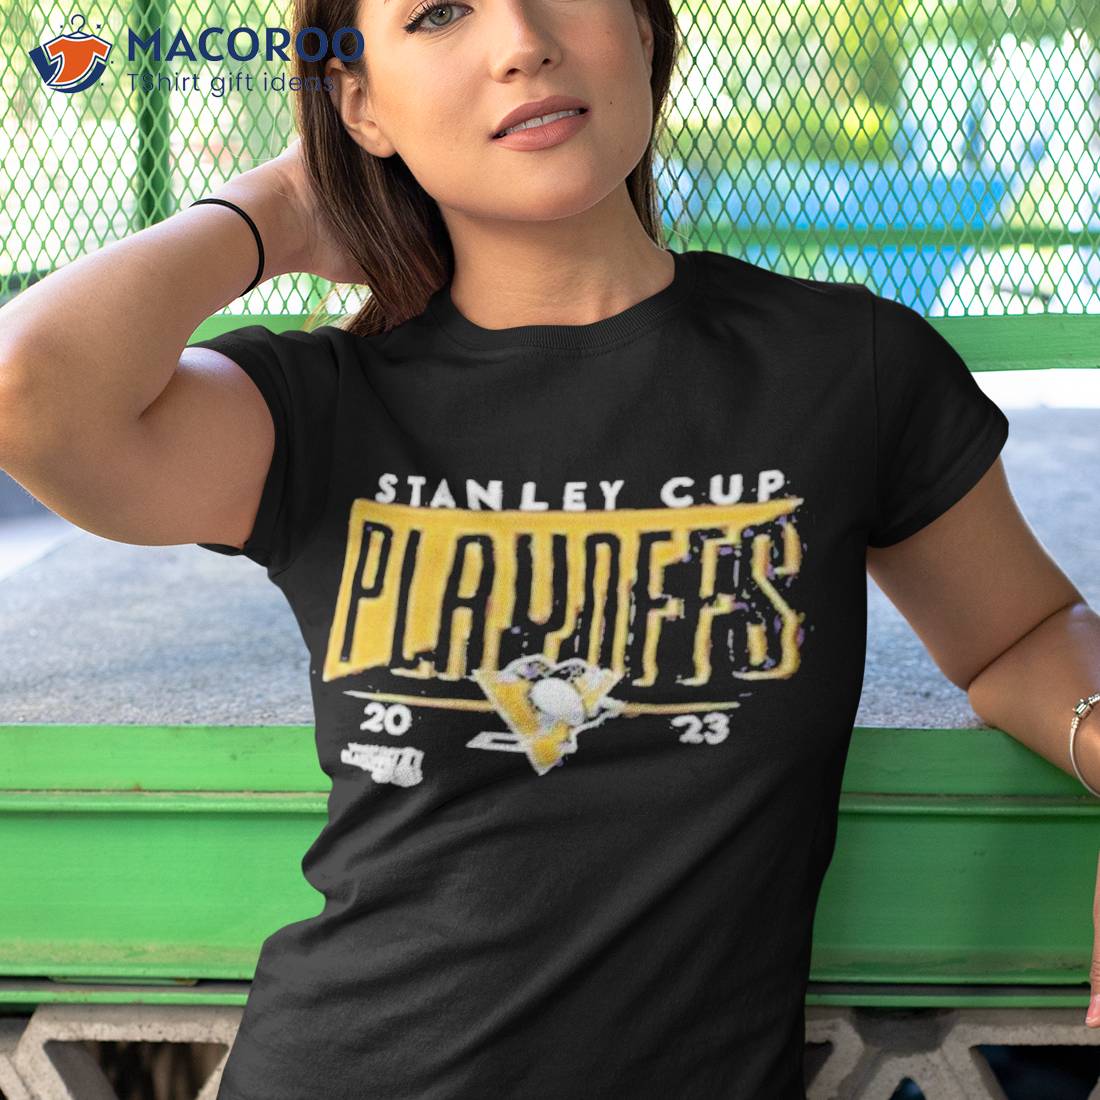 Pittsburgh Penguins 2023 Stanley Cup Playoffs Shirt